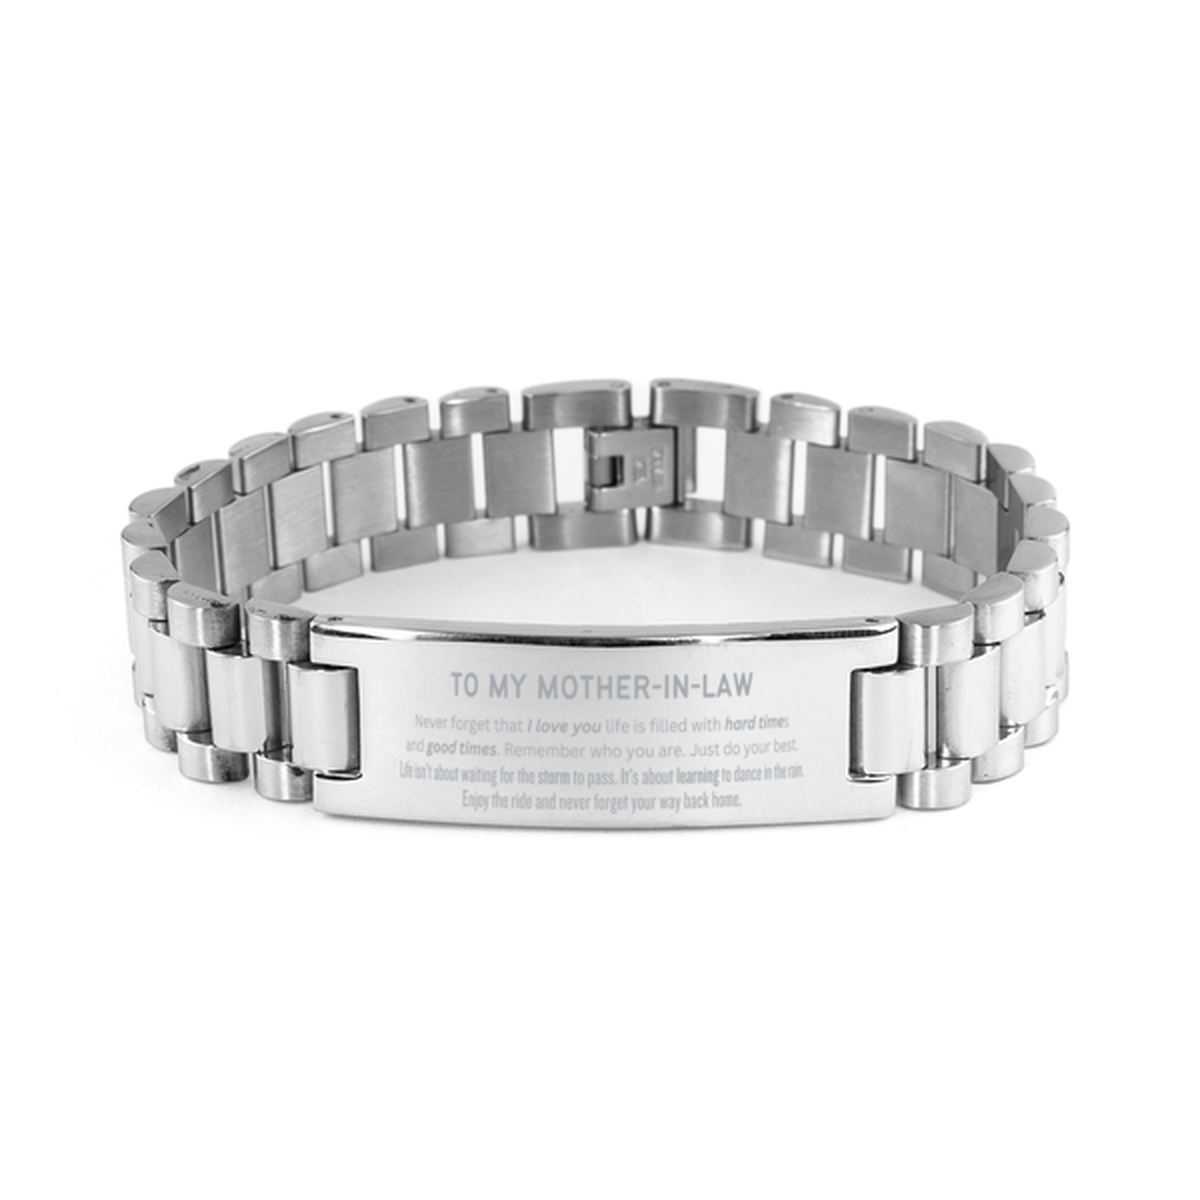 Christmas Mother-In-Law Ladder Stainless Steel Bracelet Gifts, To My Mother-In-Law Birthday Thank You Gifts For Mother-In-Law, Graduation Unique Gifts For Mother-In-Law To My Mother-In-Law Never forget that I love you life is filled with hard times and go